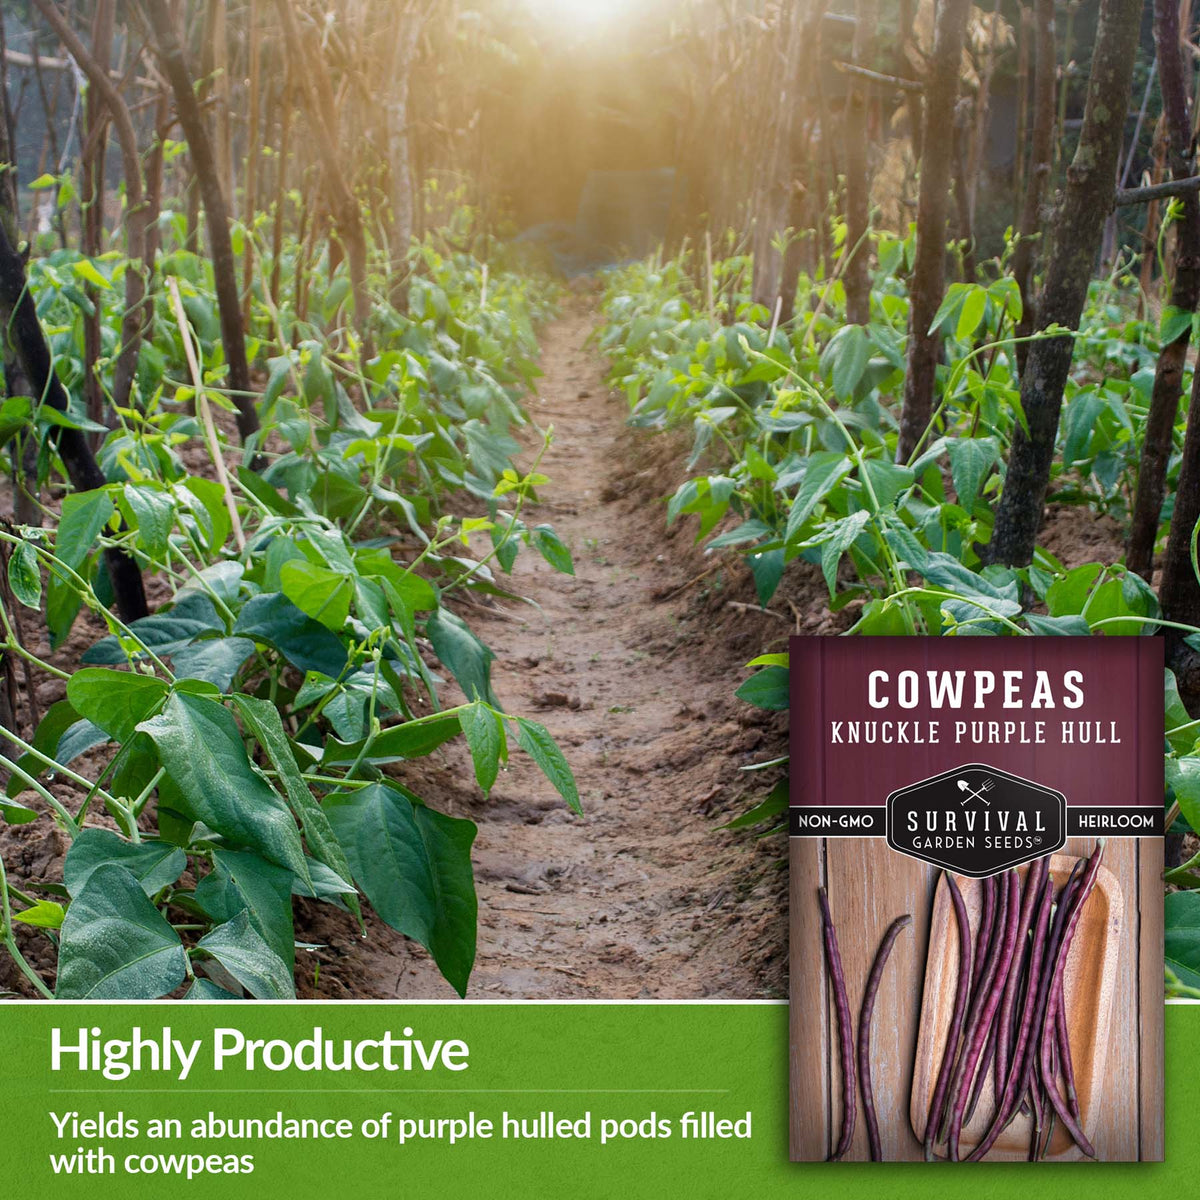 Knuckle Purple Hull Cowpeas are highly productive